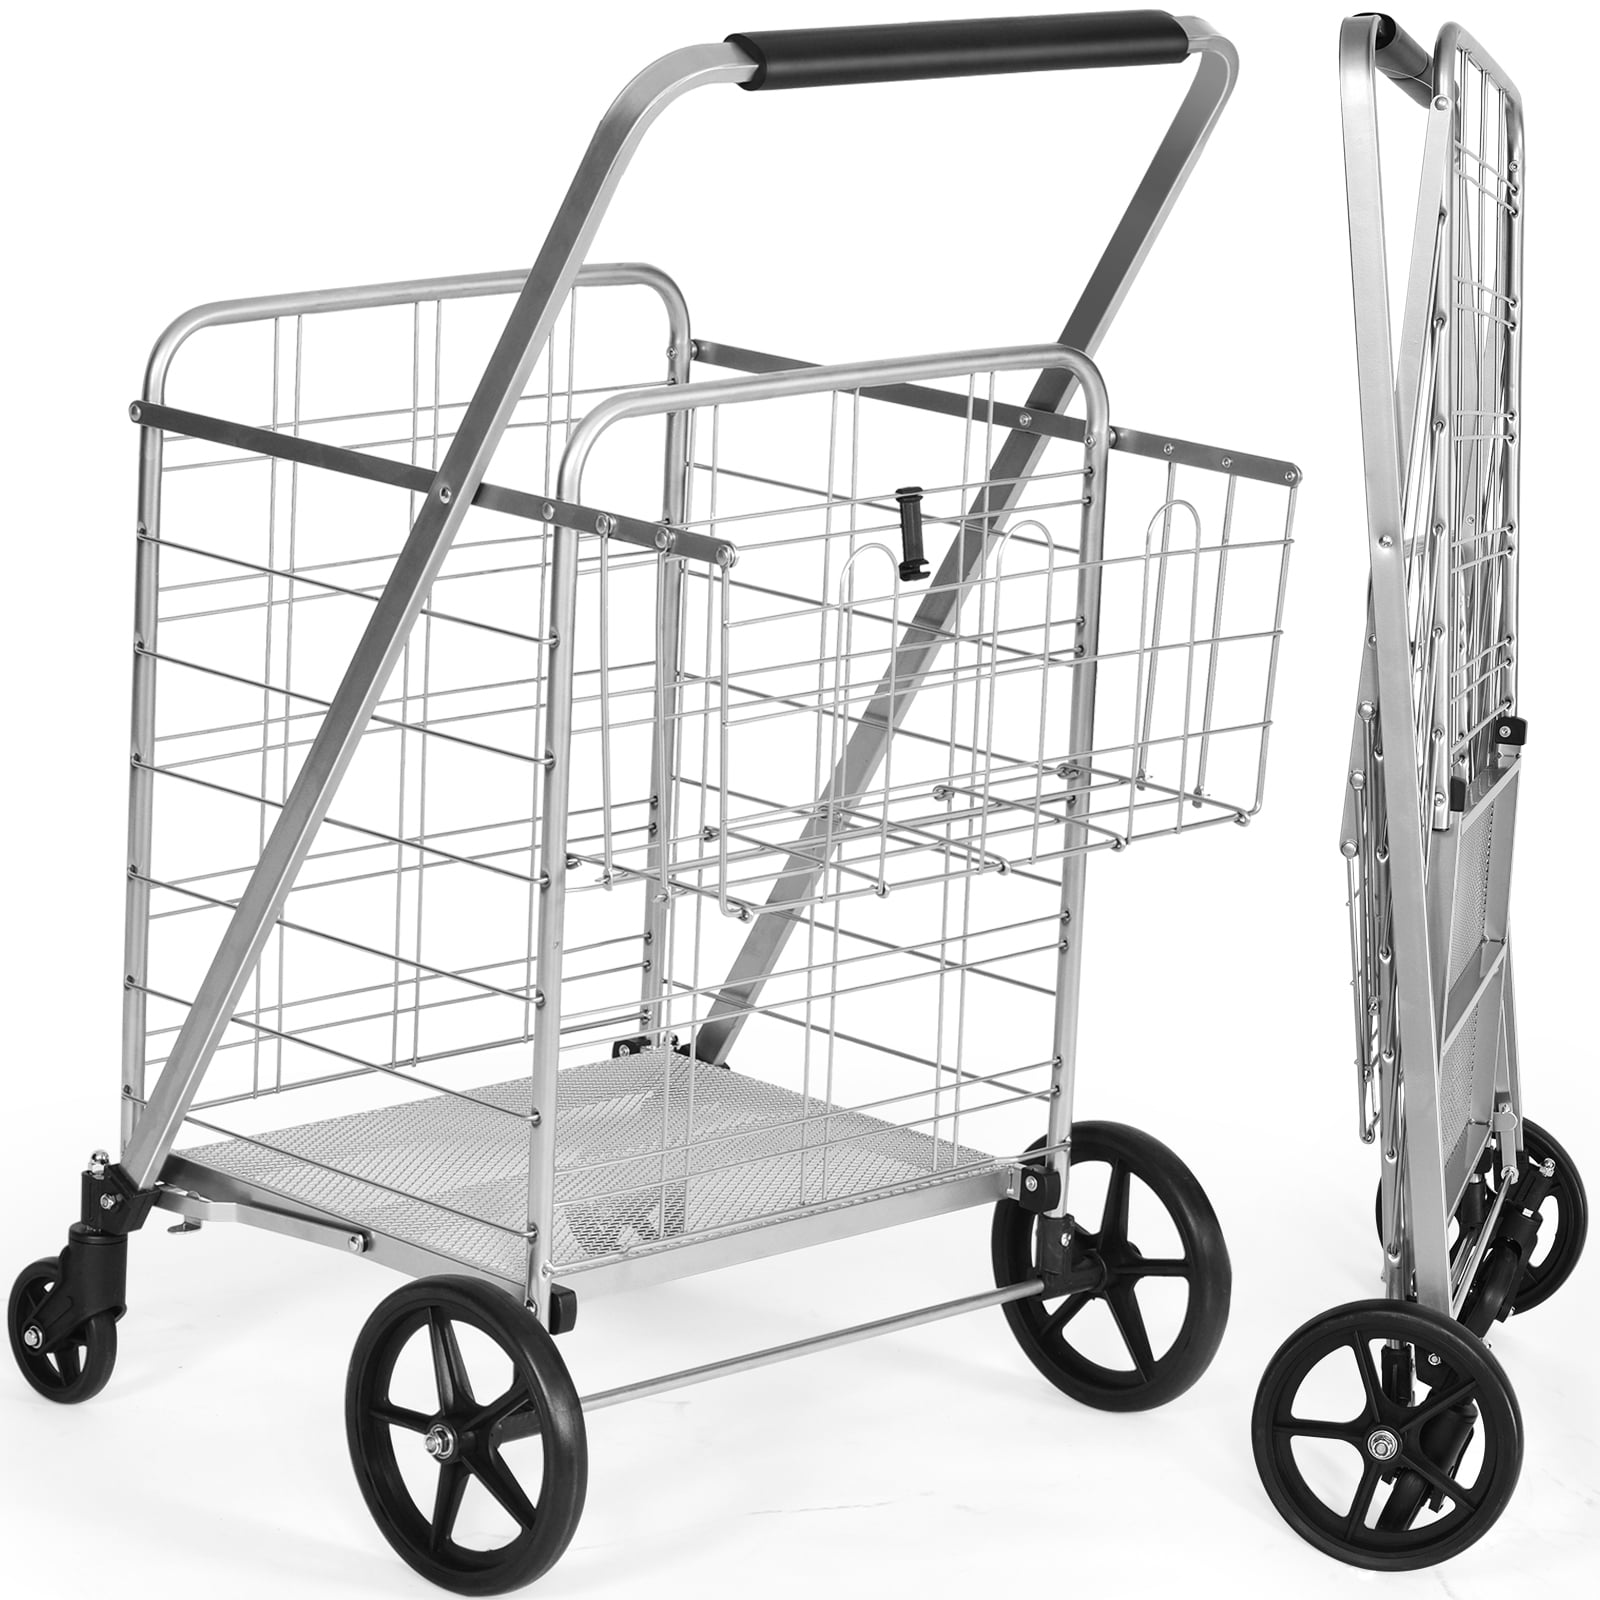 Light Weight Trolley Newly Launched Medium Grocery Utility Carts with Front Swivel Wheels by AFT Pro USA,Foldable and Collapsible,Heavy Duty Loading Easy to Put On Wheels,Package Size 38x18.5x2.5in